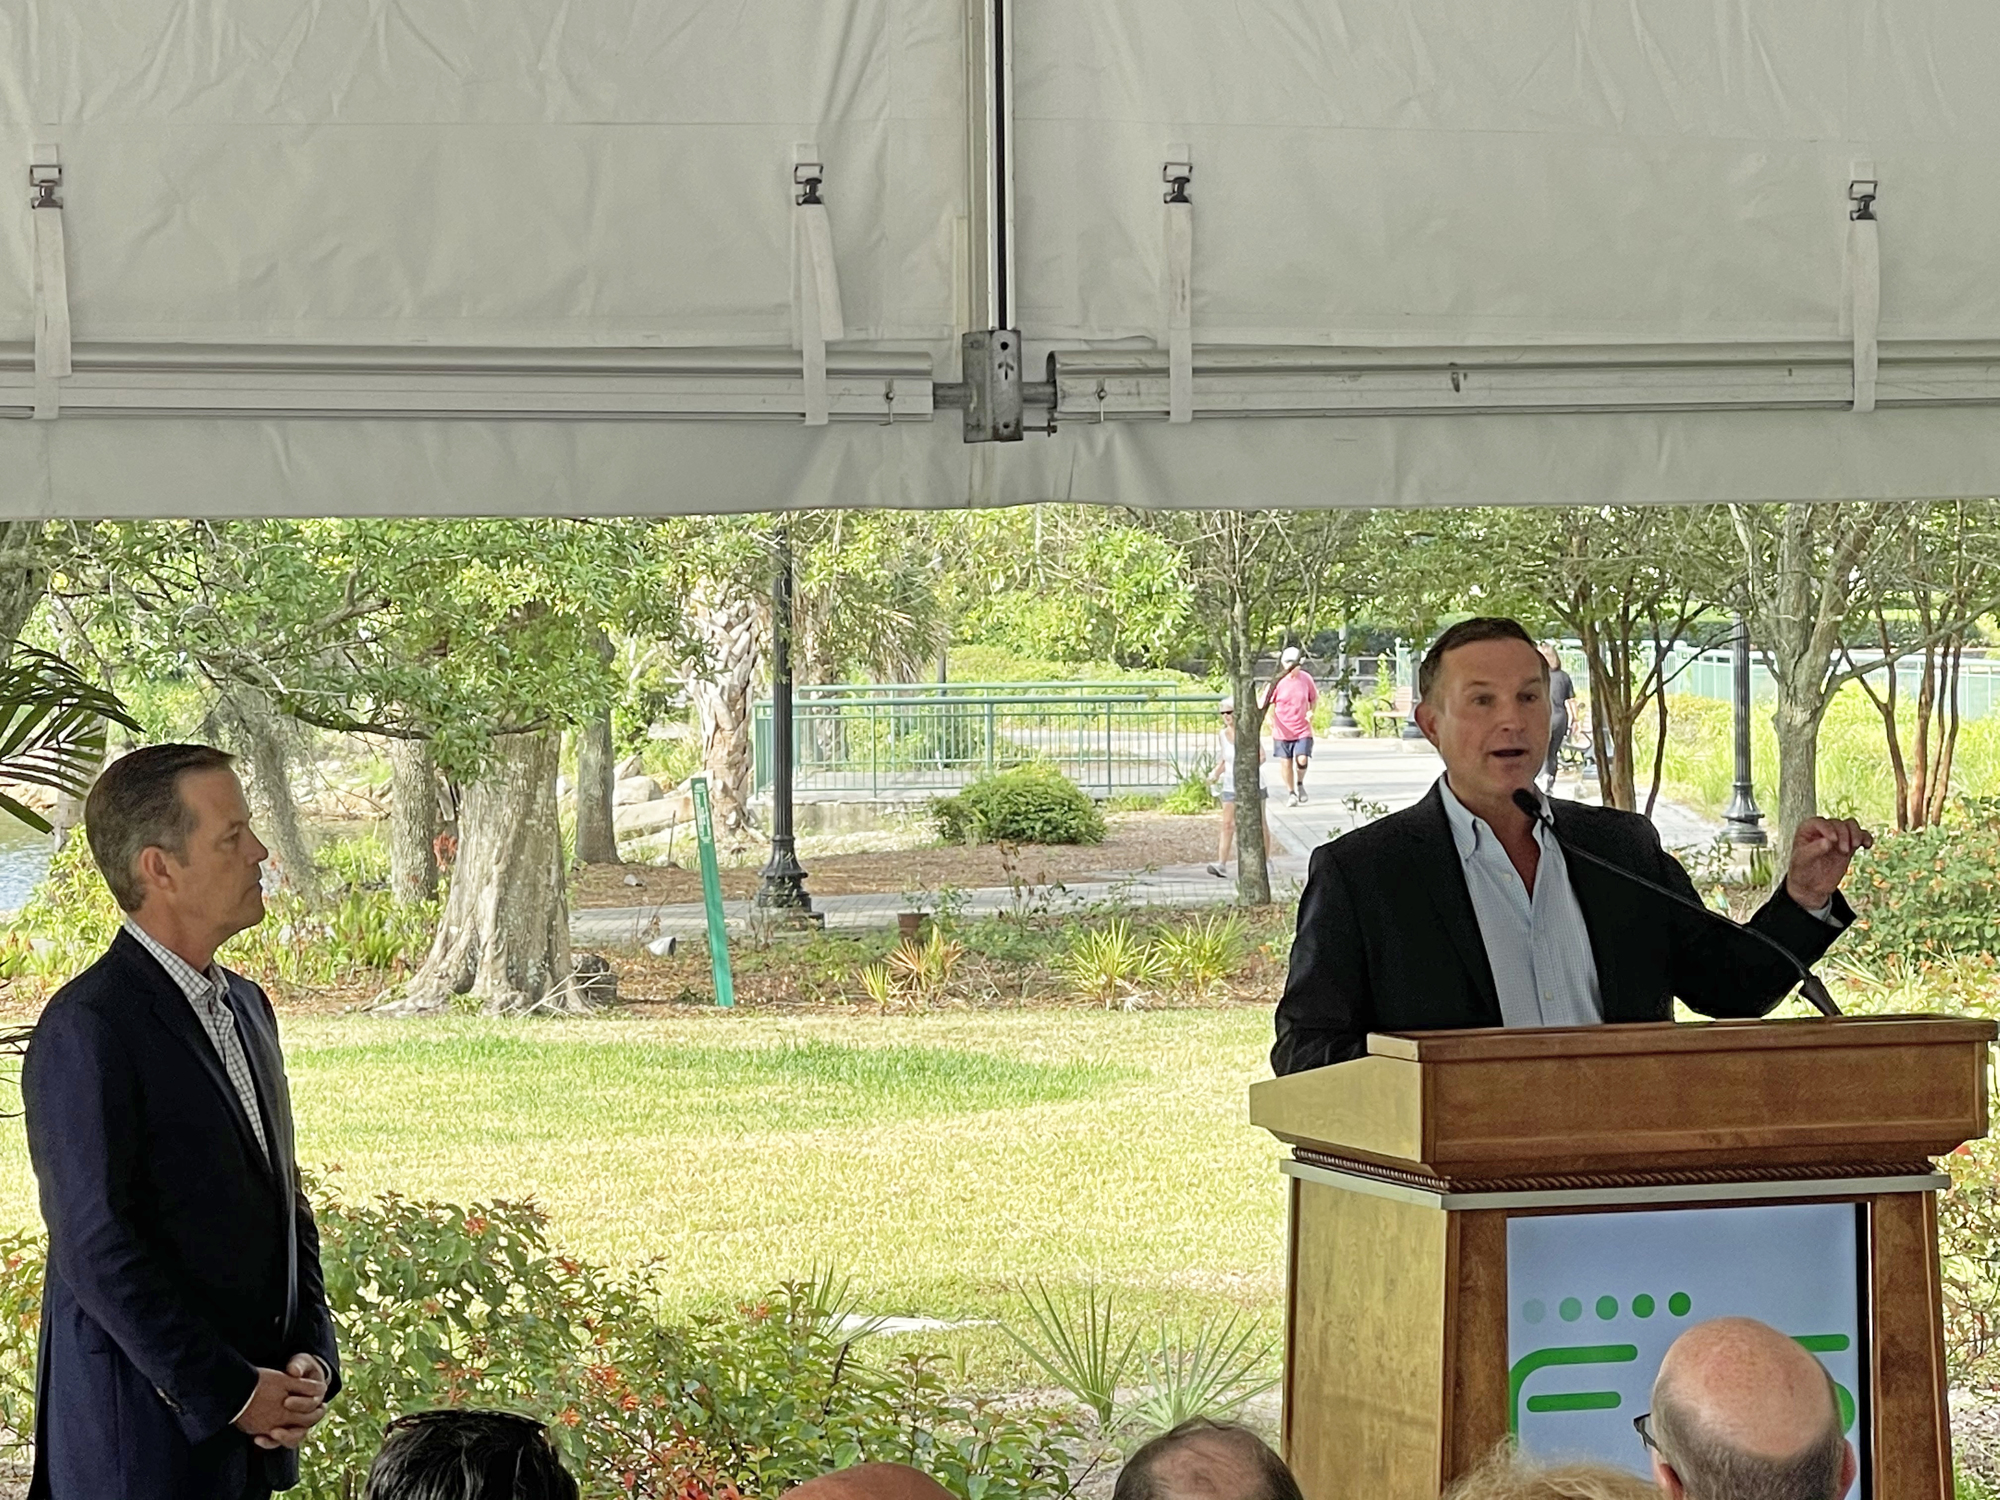 Mayor Lenny Curry speaks at the topping off ceremony while FIS CEO Gary Norcross watches.